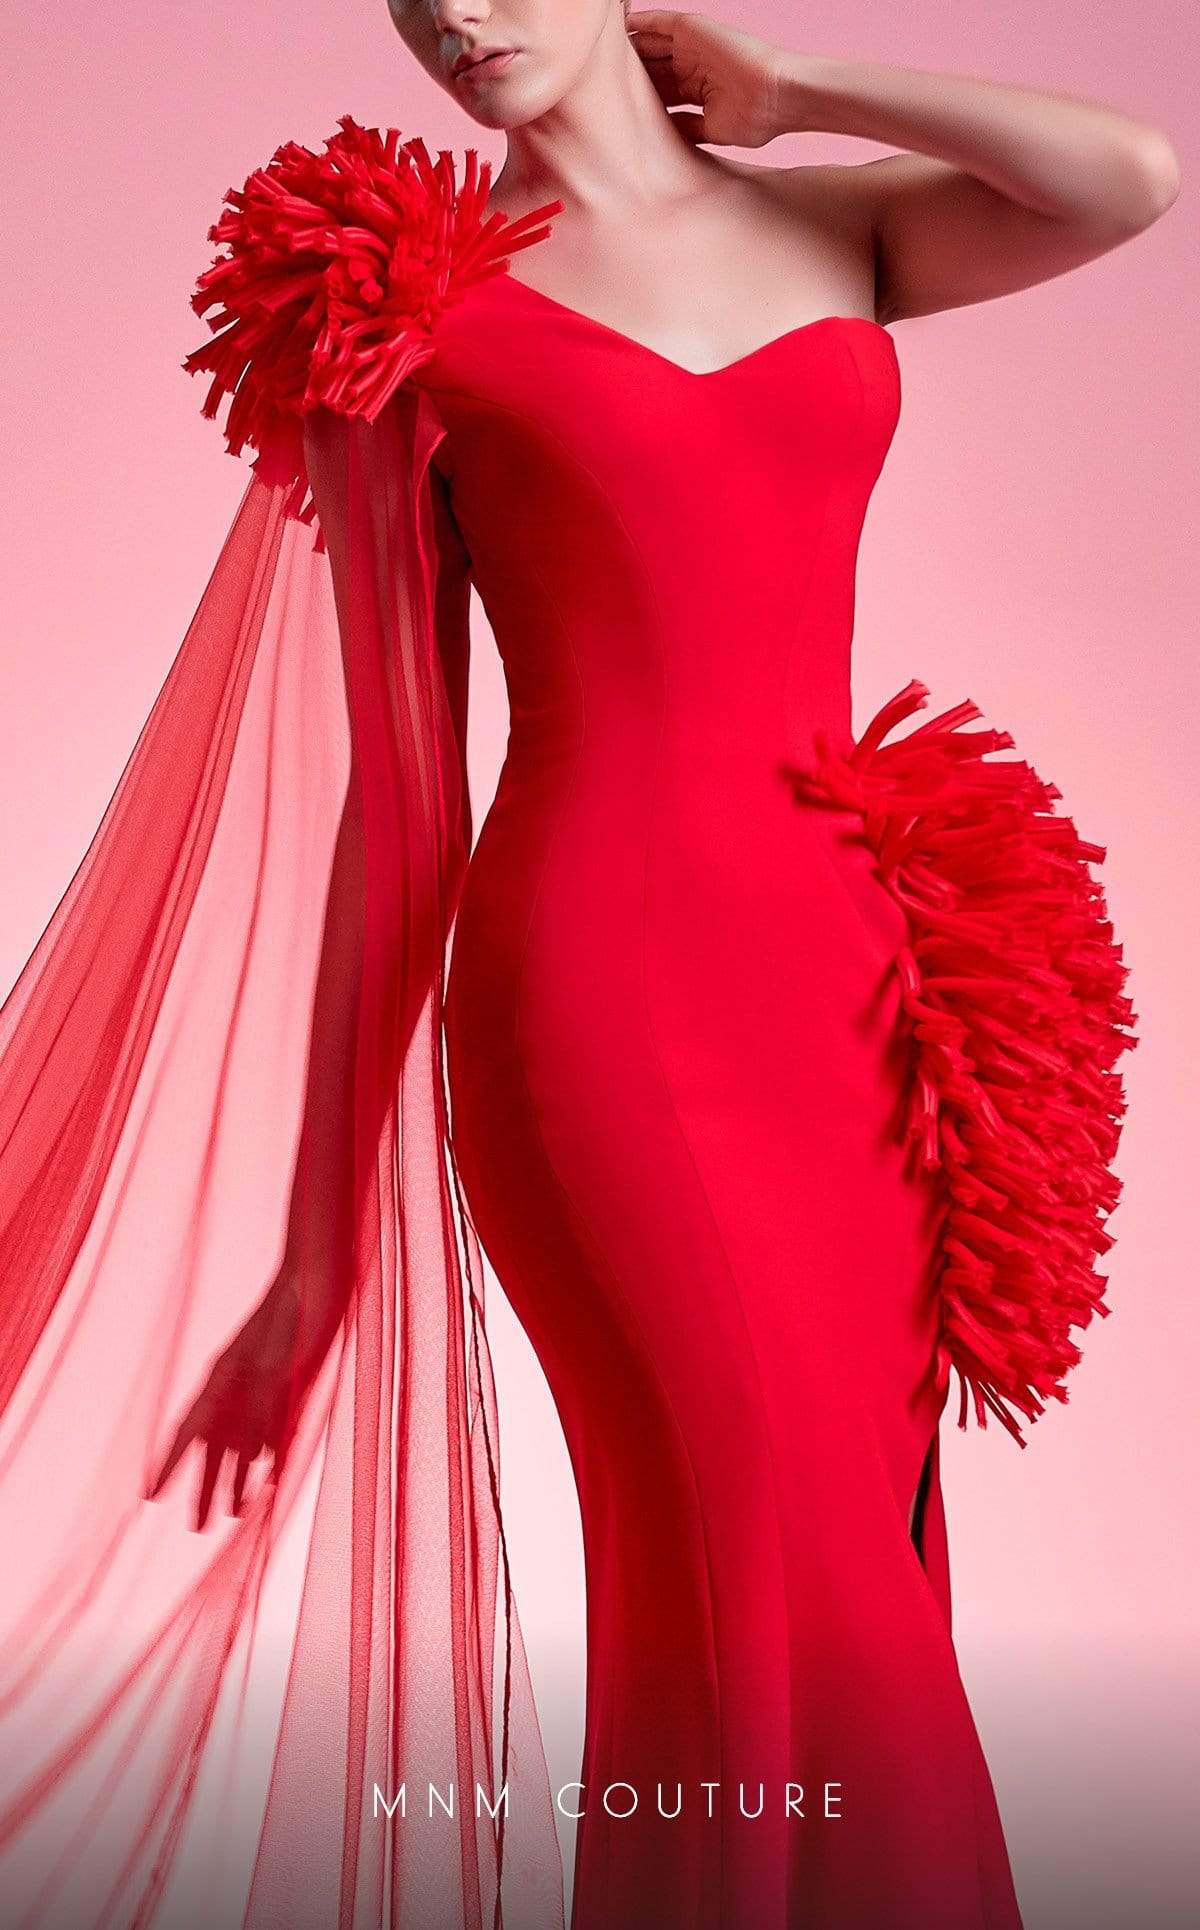 MNM COUTURE - G1211 Asymmetrical Fringed High Slit Mermaid Gown In Red